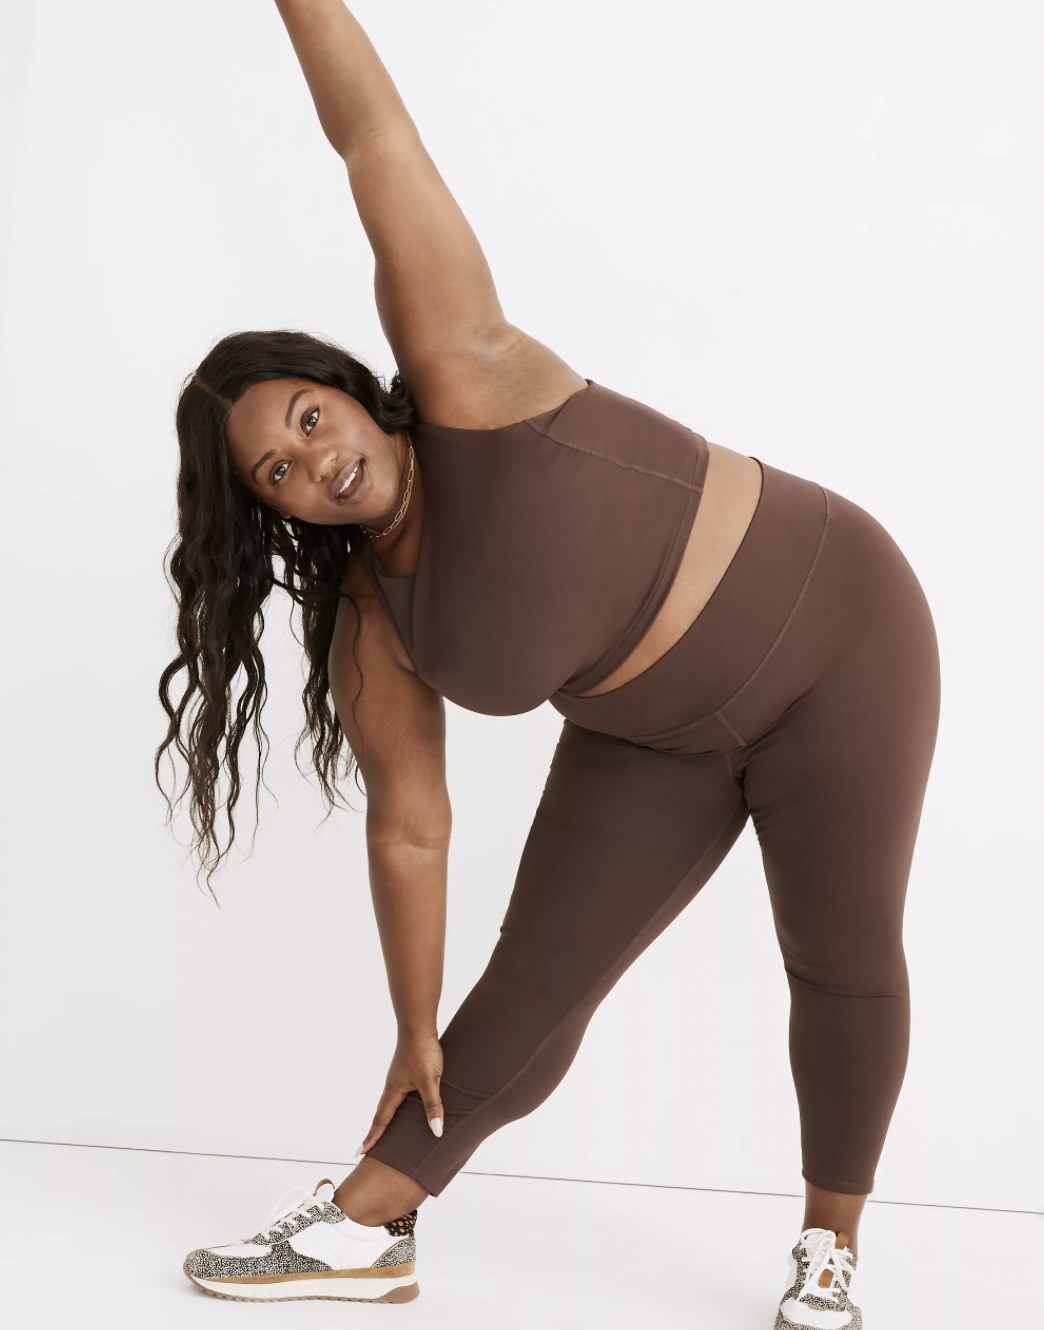 Model stretching in the brown leggings with matching crop top